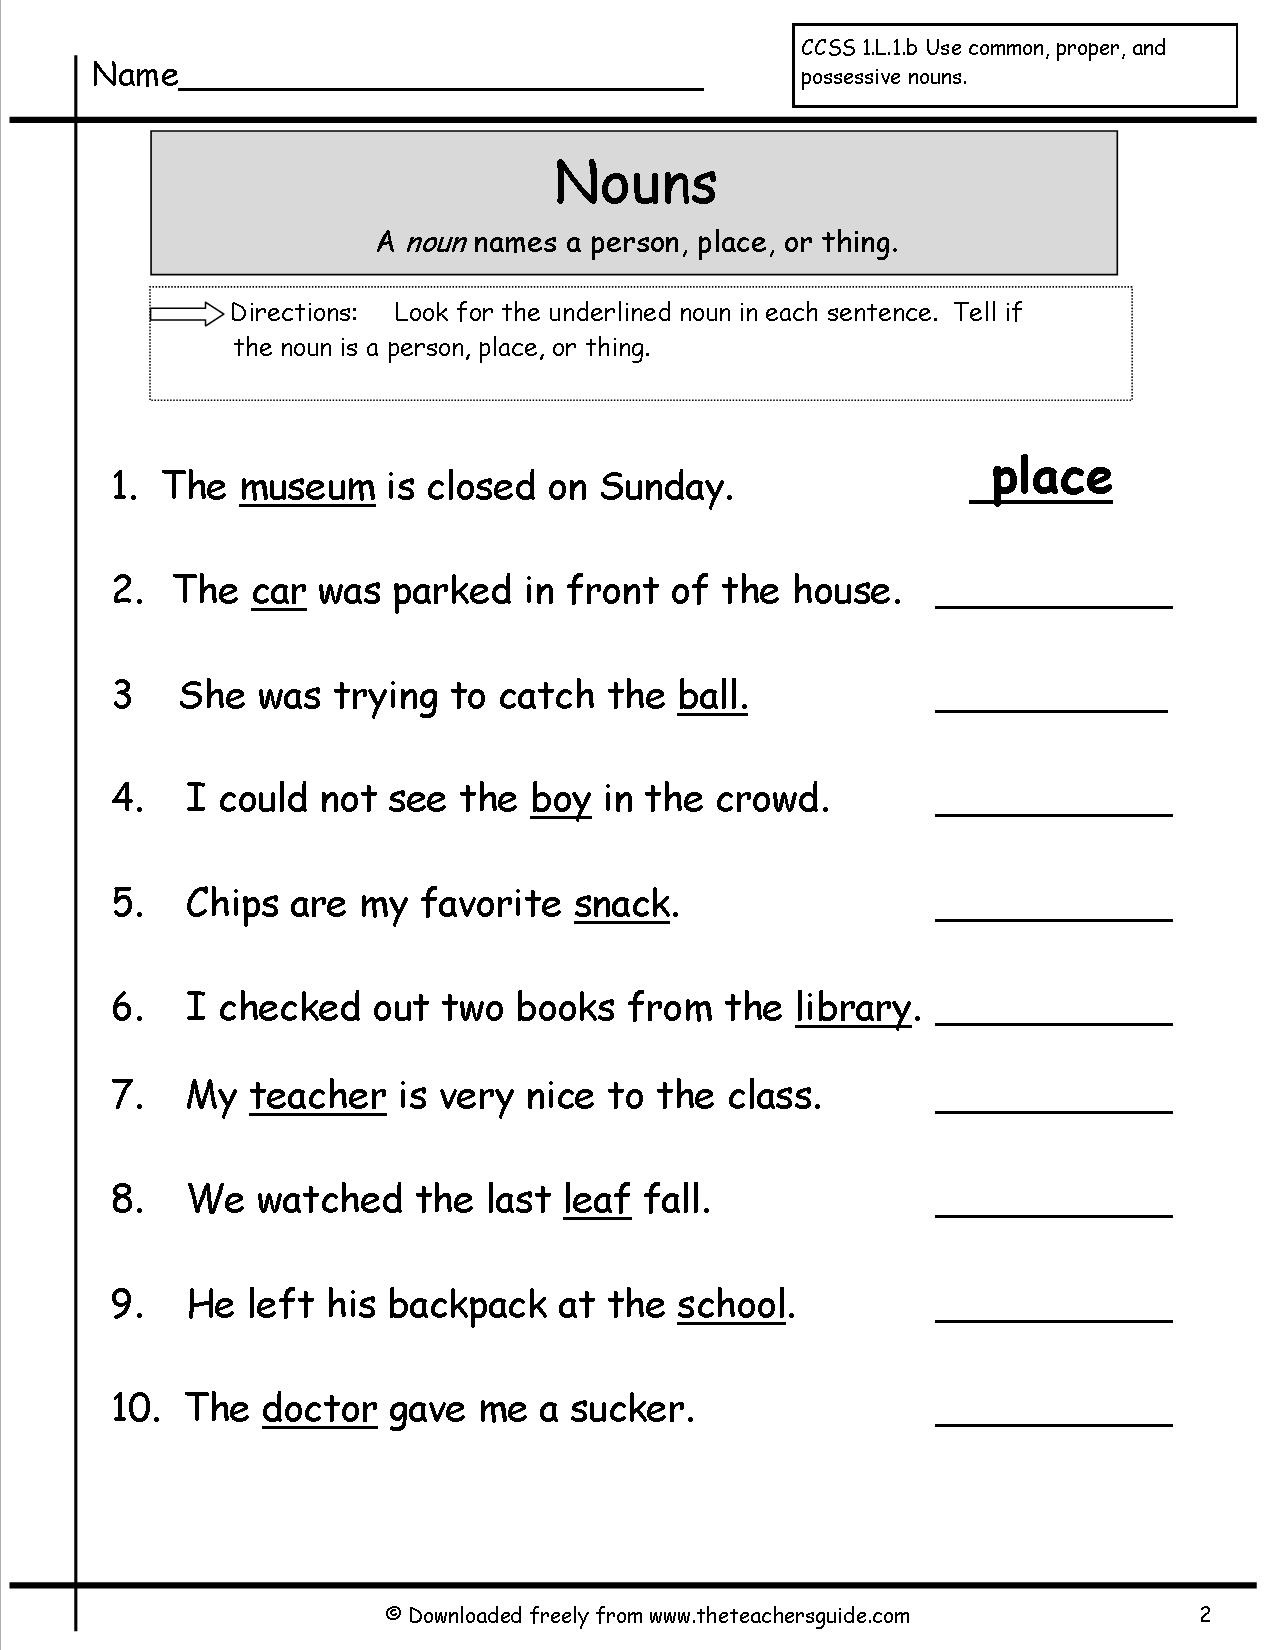 Nouns Worksheets From The Teacher&amp;#039;s Guide - Free Noun Printables